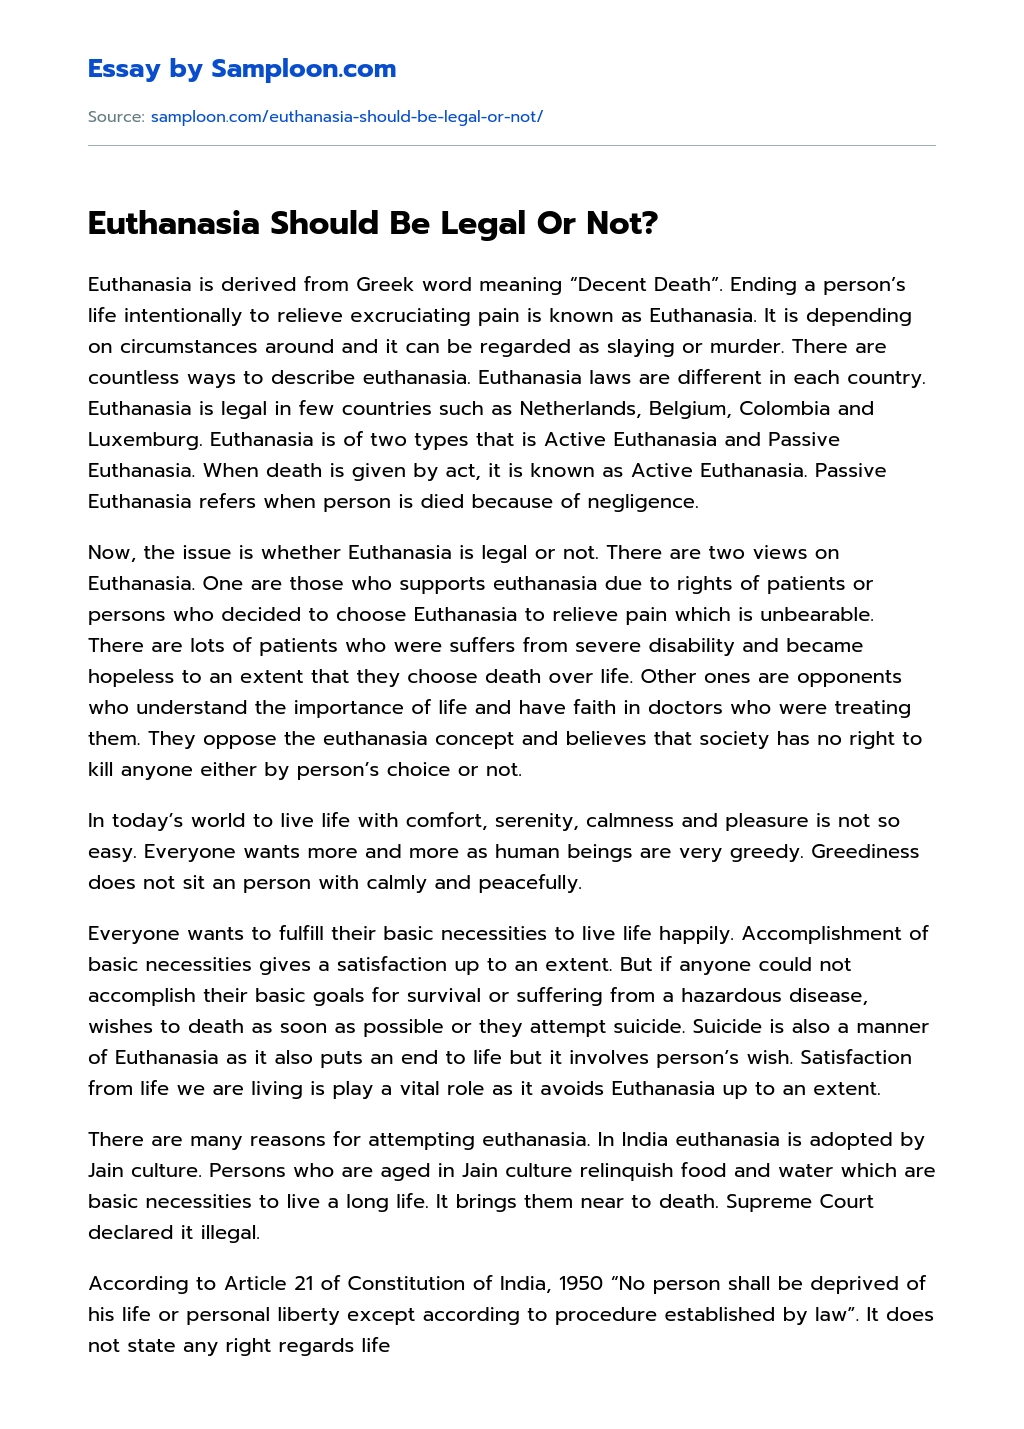 Euthanasia Should Be Legal Or Not? Opinion Essay essay